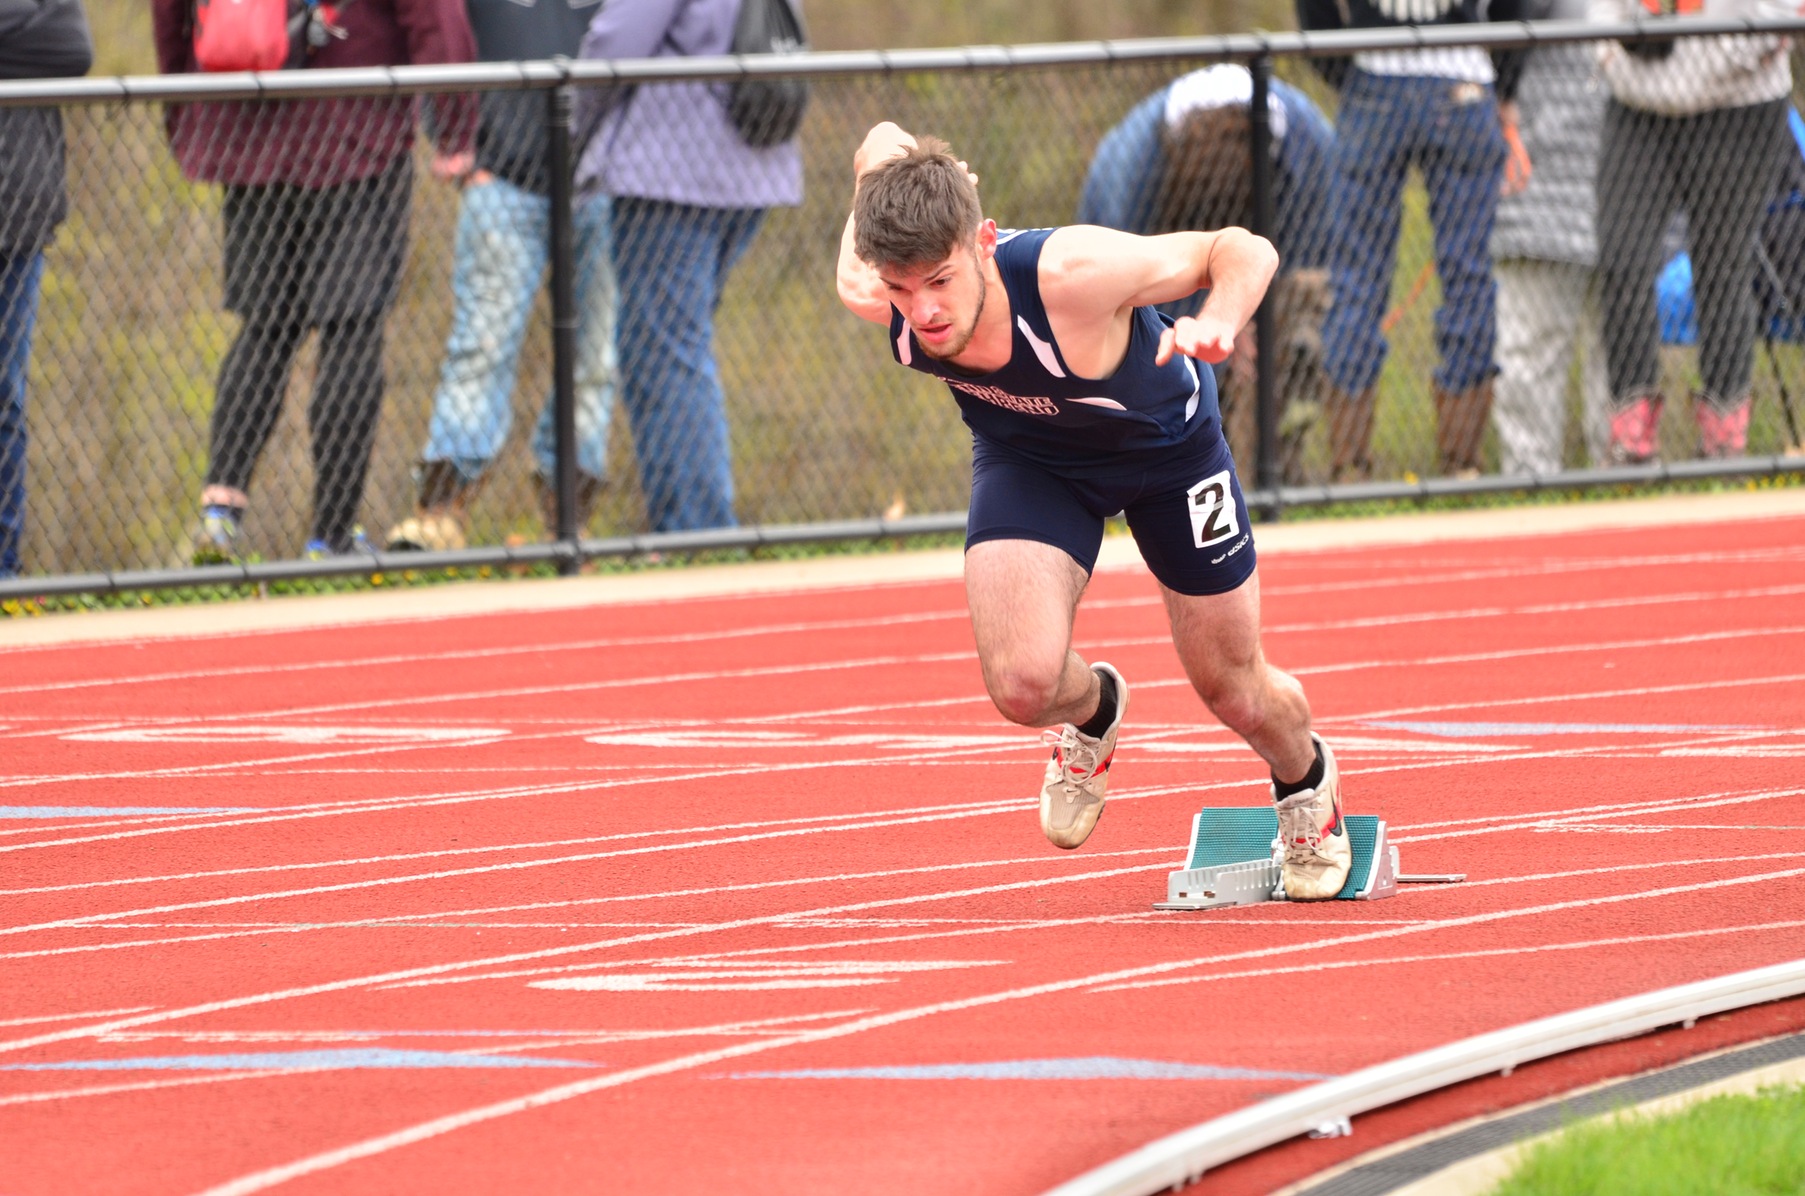 Men's Outoor Track & Field in Fourth Place at ECAC Championships